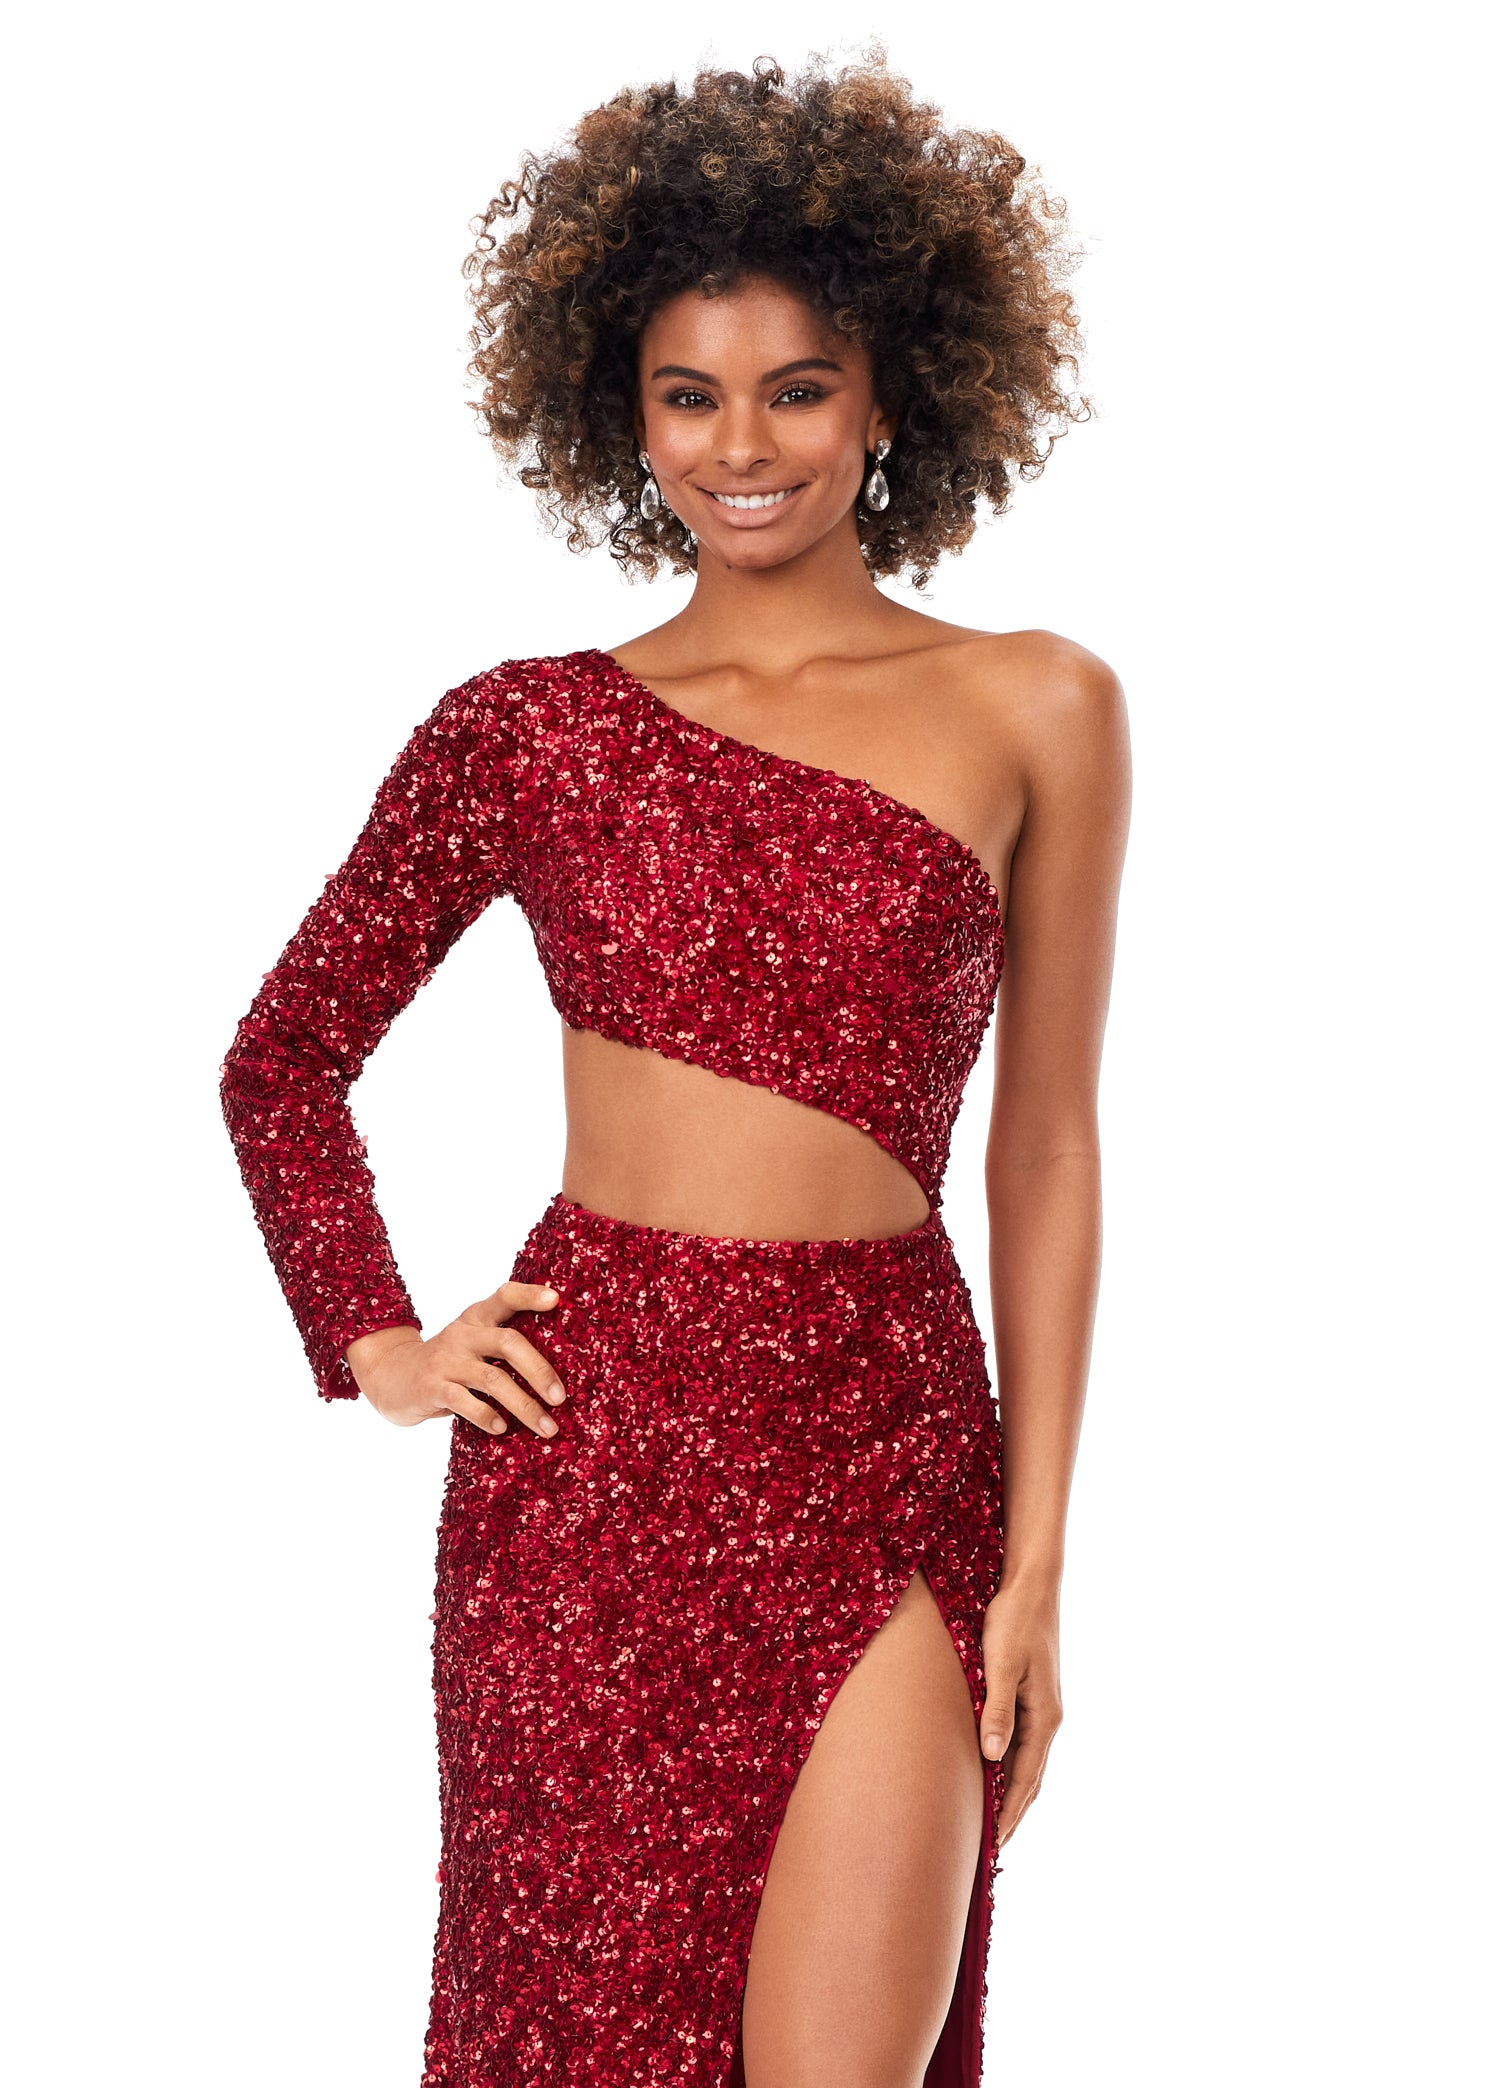 Ashley Lauren 11340 This sequin one shoulder gown features one sleeve and a shark bite cut out. The gown is complete with a left leg slit.